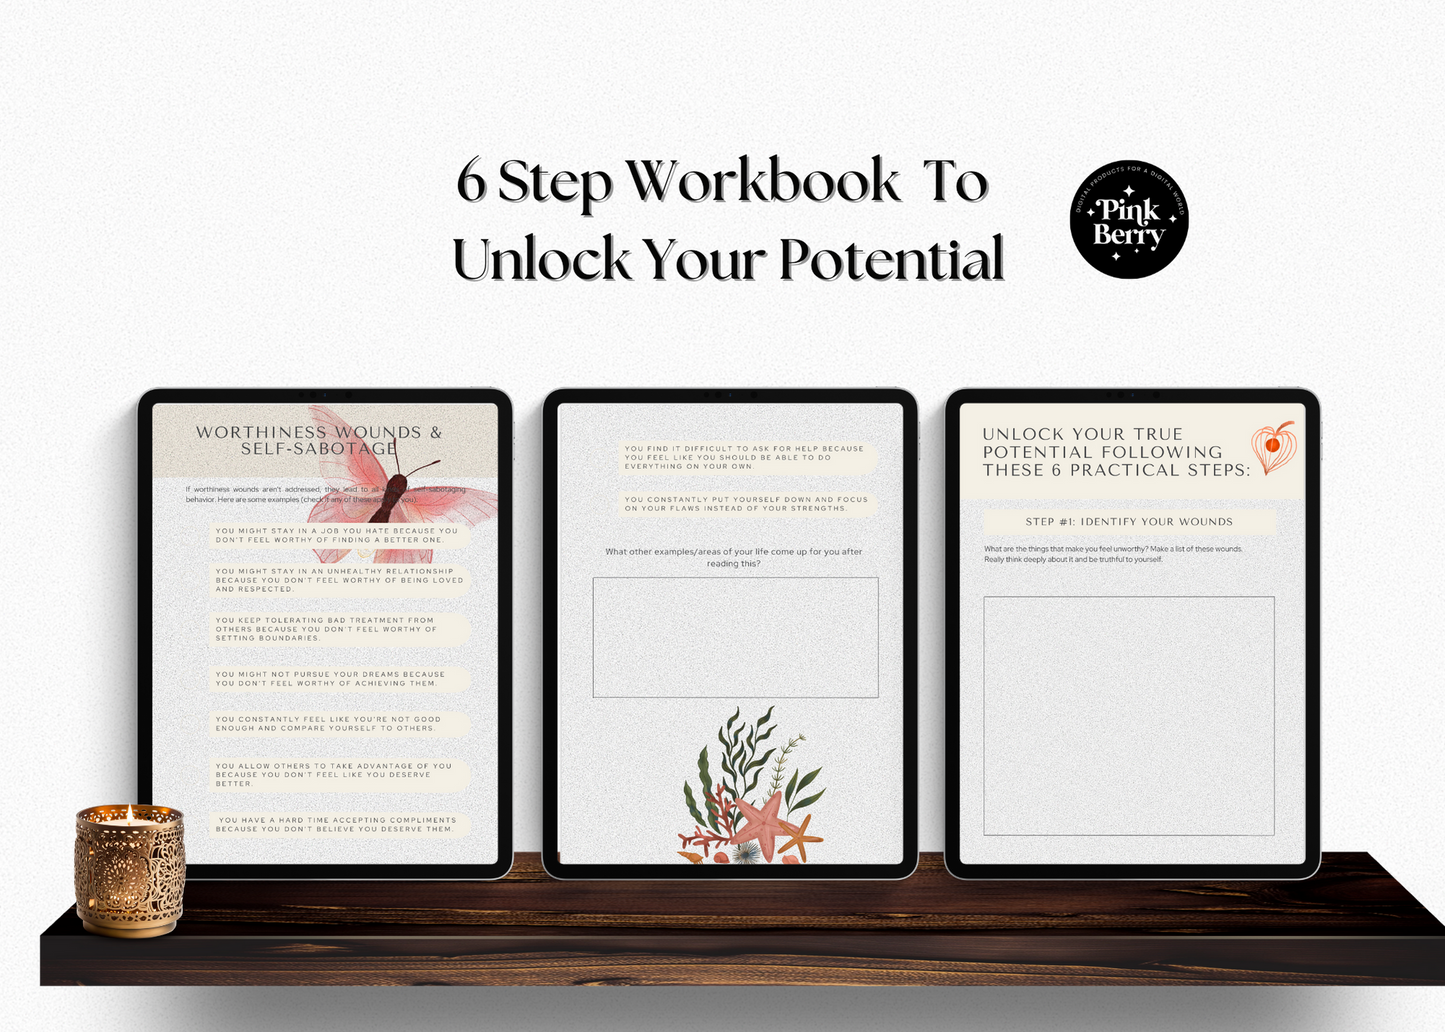 Inner Core Wounds Digital Workbook-52 Page Goodnotes Digital Workbook- 6 Steps With Writing Prompts